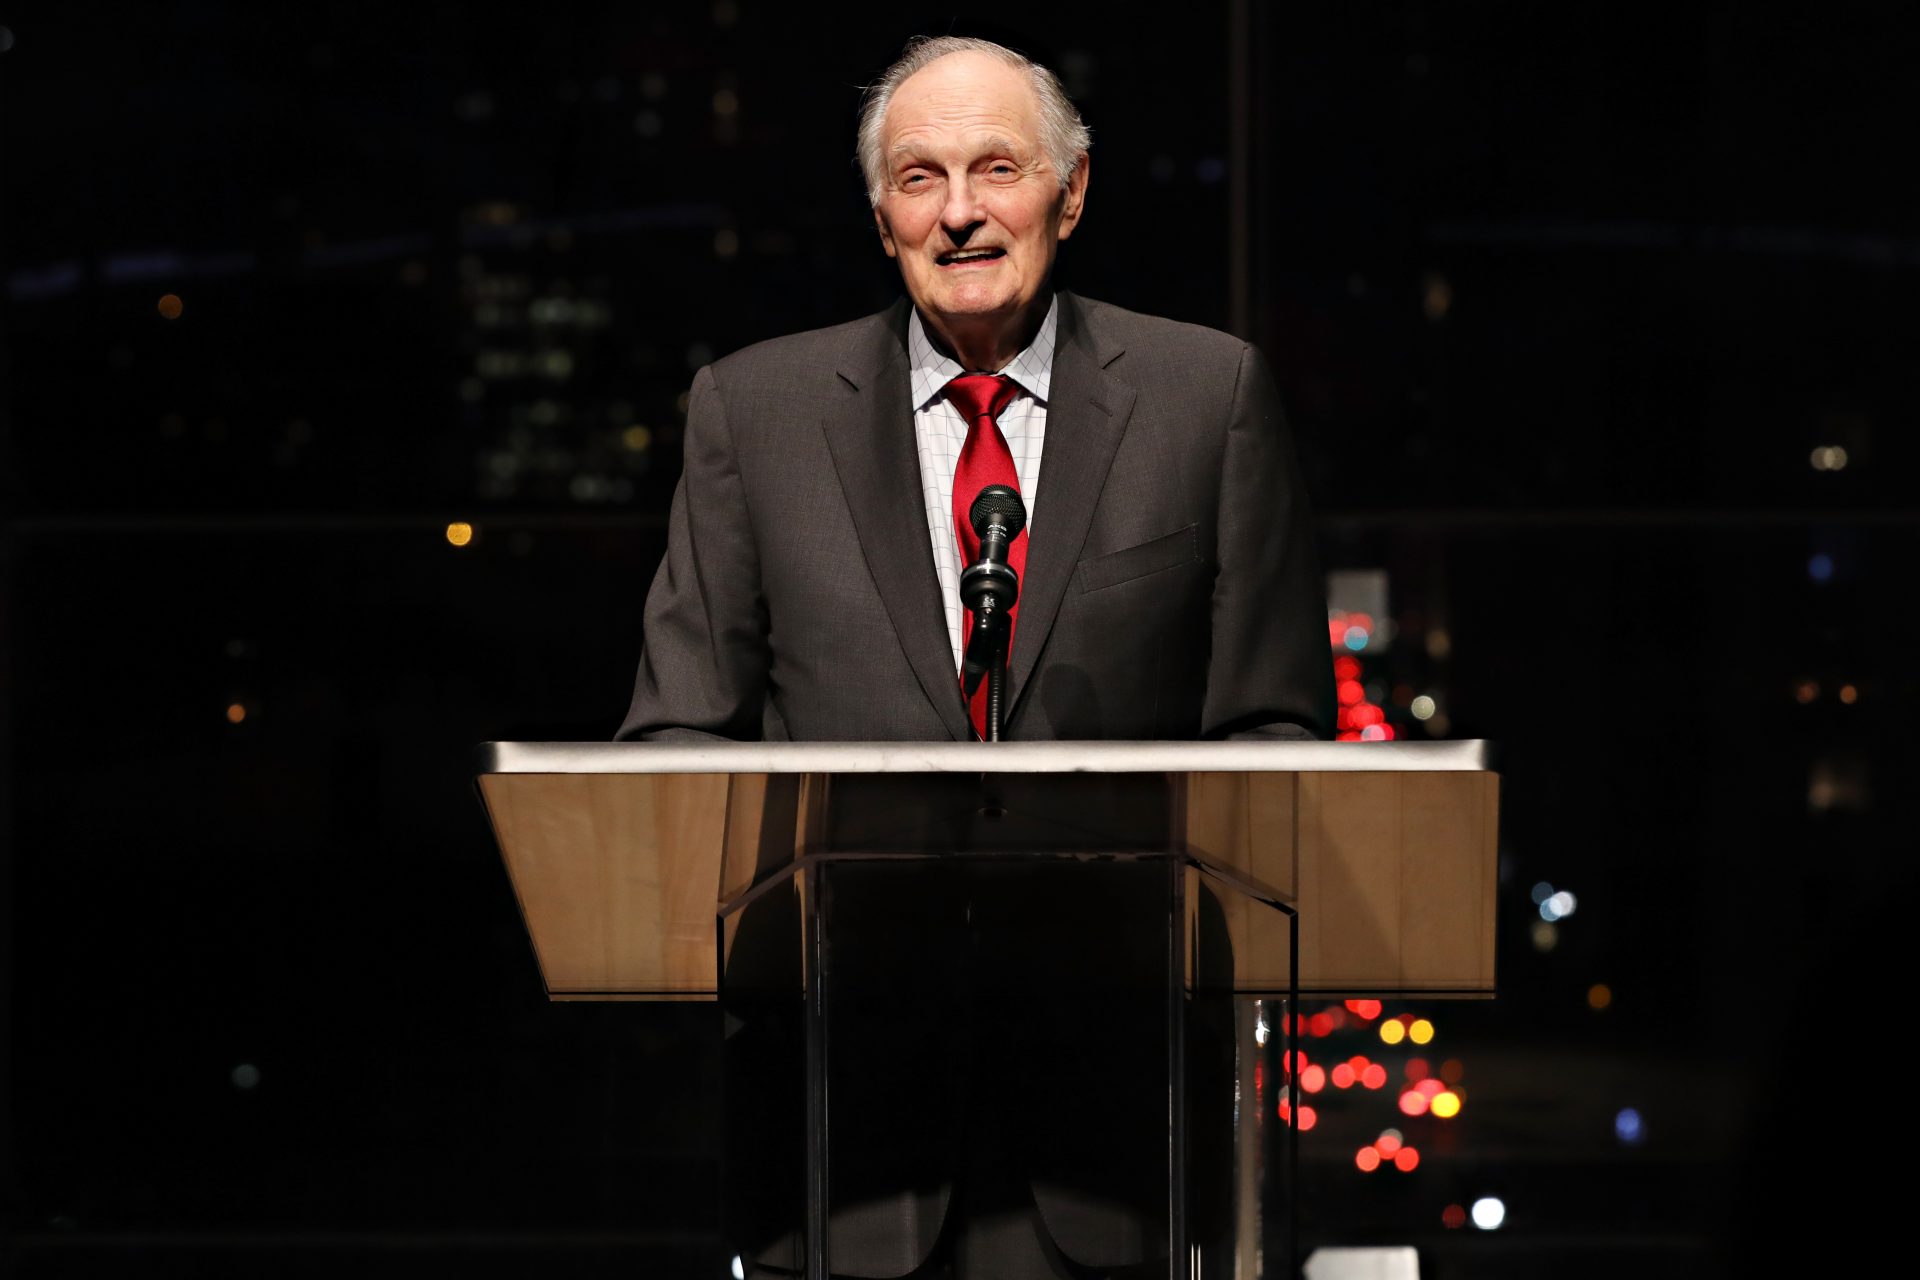 Alda continues to be motivated by his curiosity about science and communication